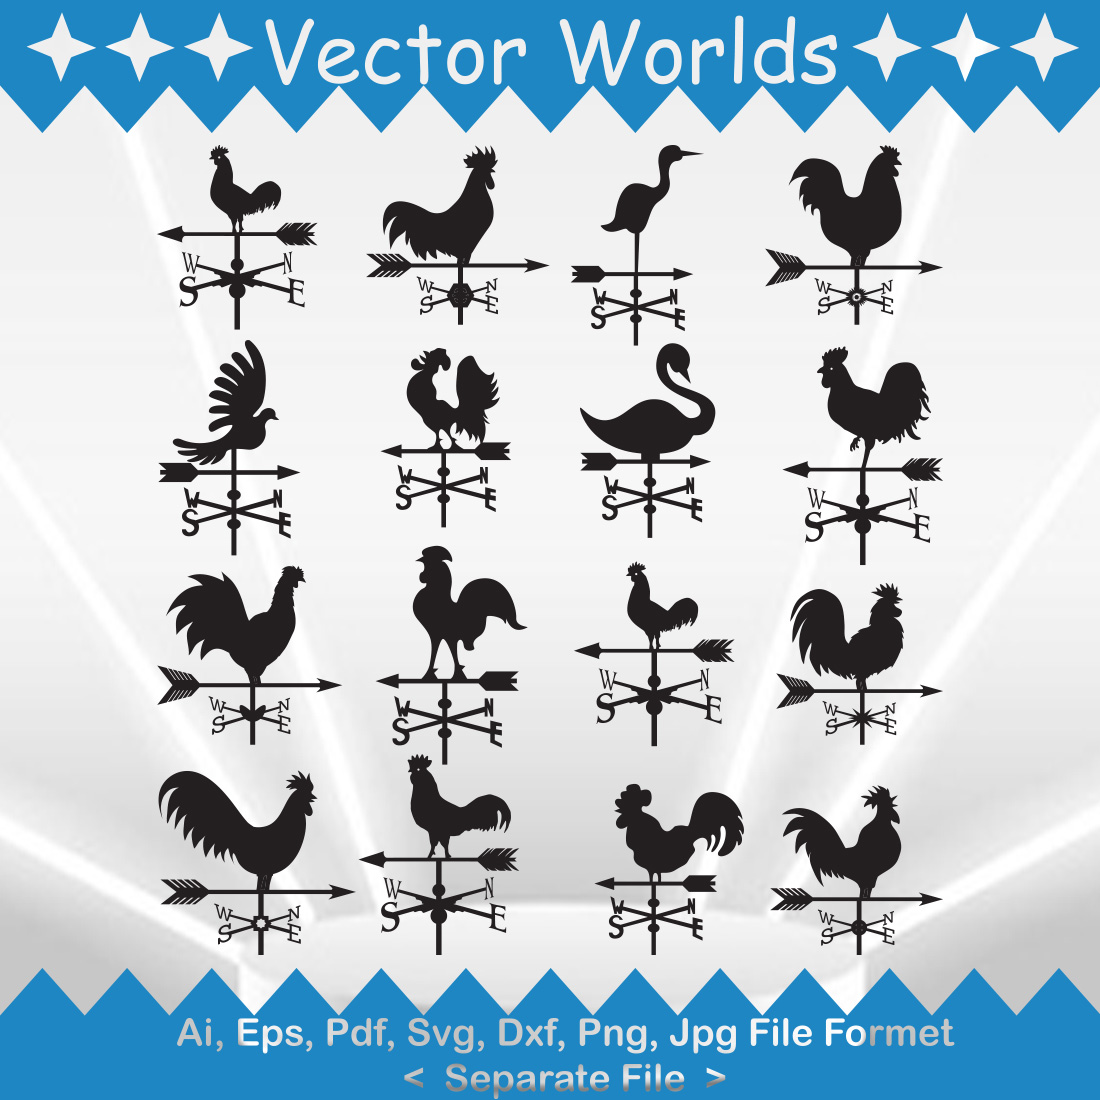 Pack of vector unique weather vane silhouette images.